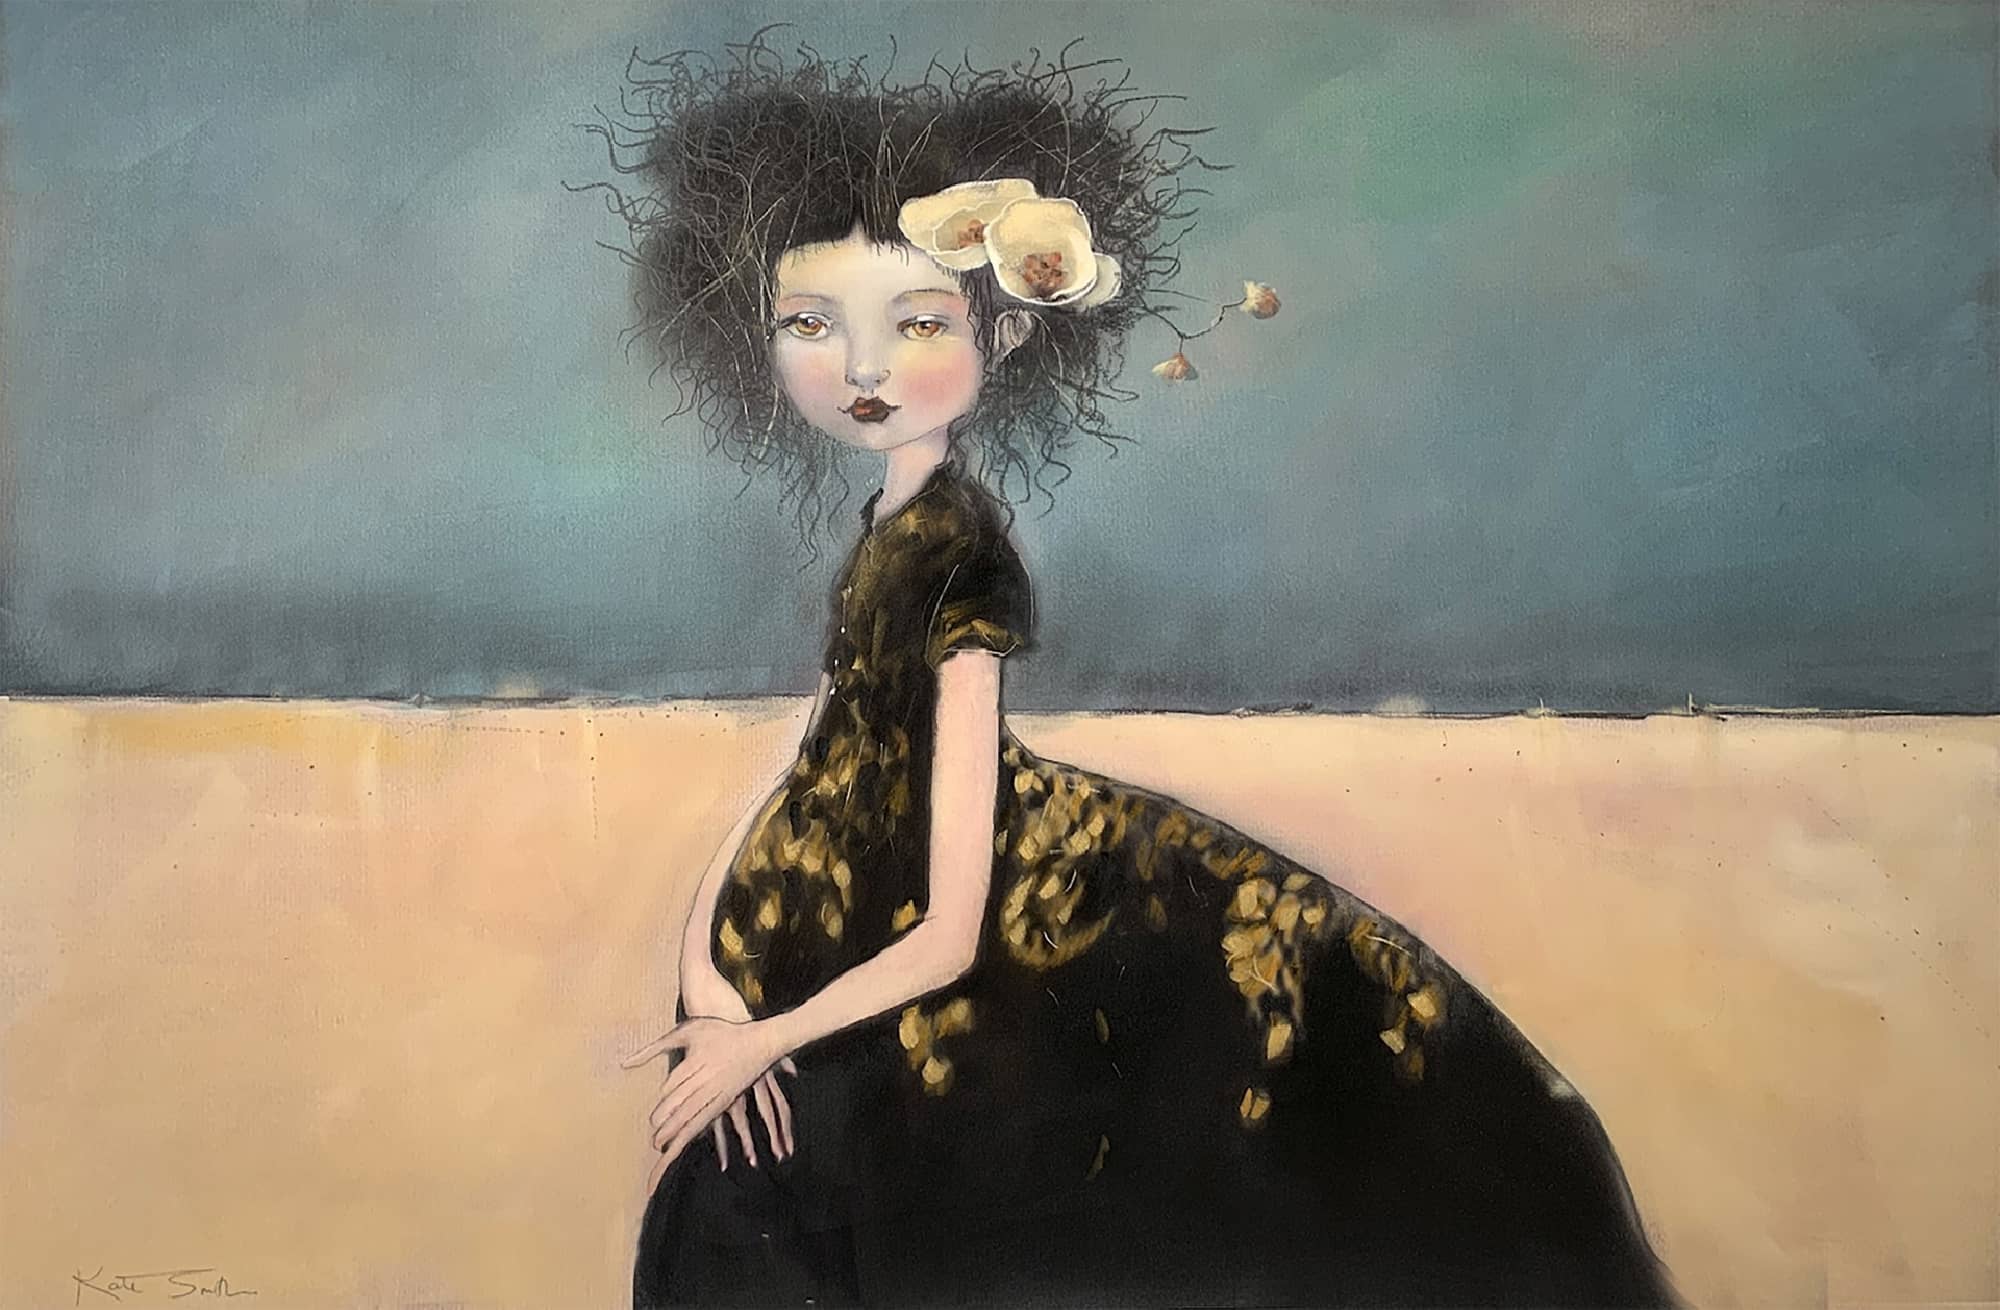 Kate Smith Painting ~ 'Captured Dreamer' - Curate Art & Design Gallery in Sorrento Mornington Peninsula Melbourne